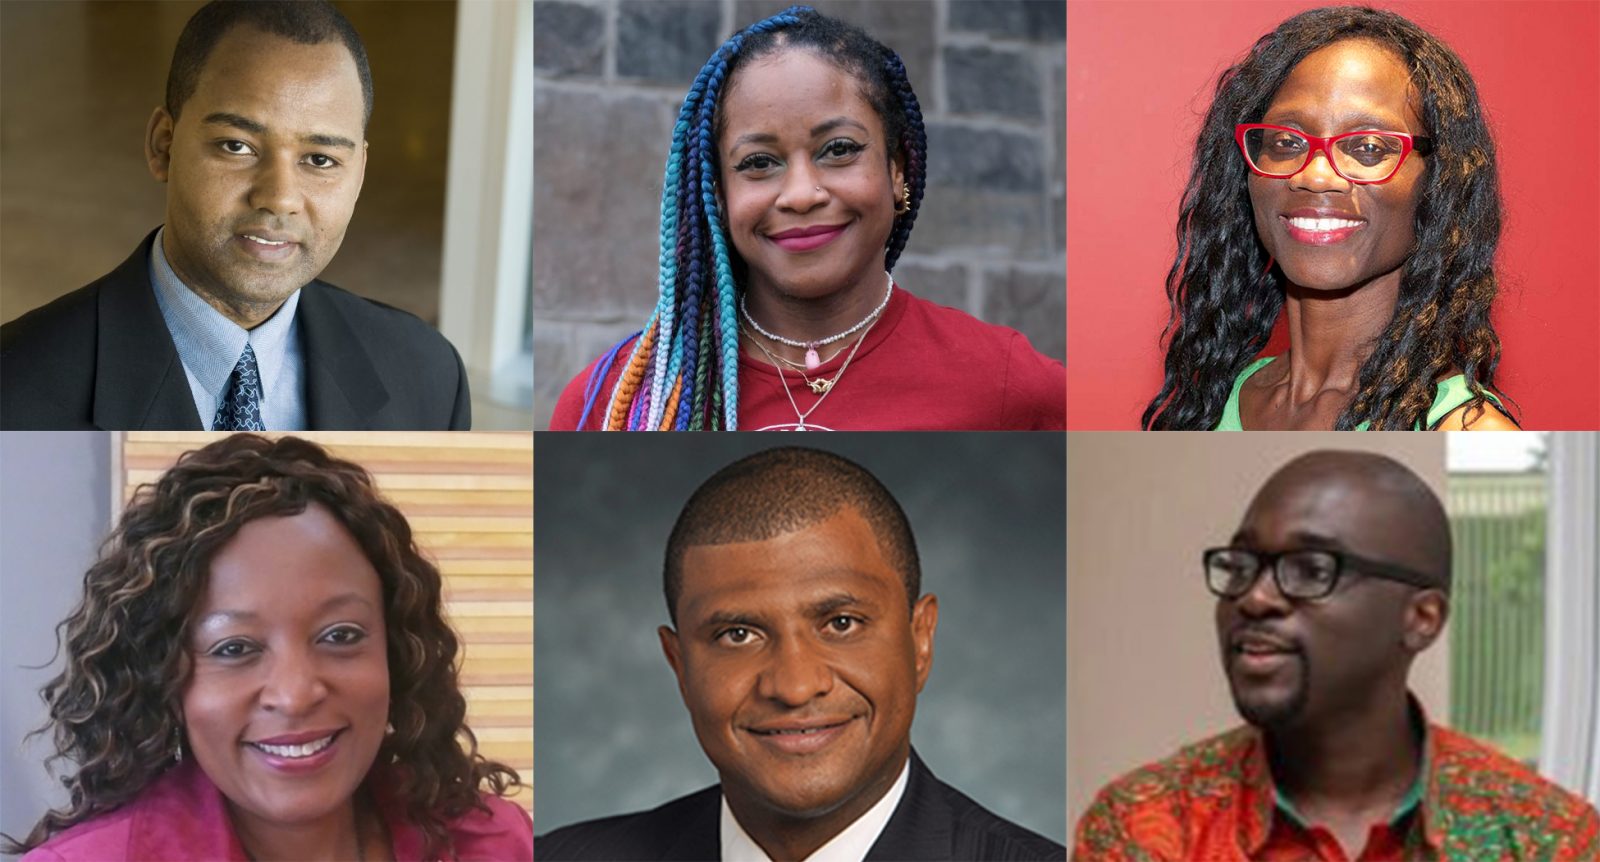 Head-and-shoulders photos of six people who will be participating in an upcoming panel discussion.